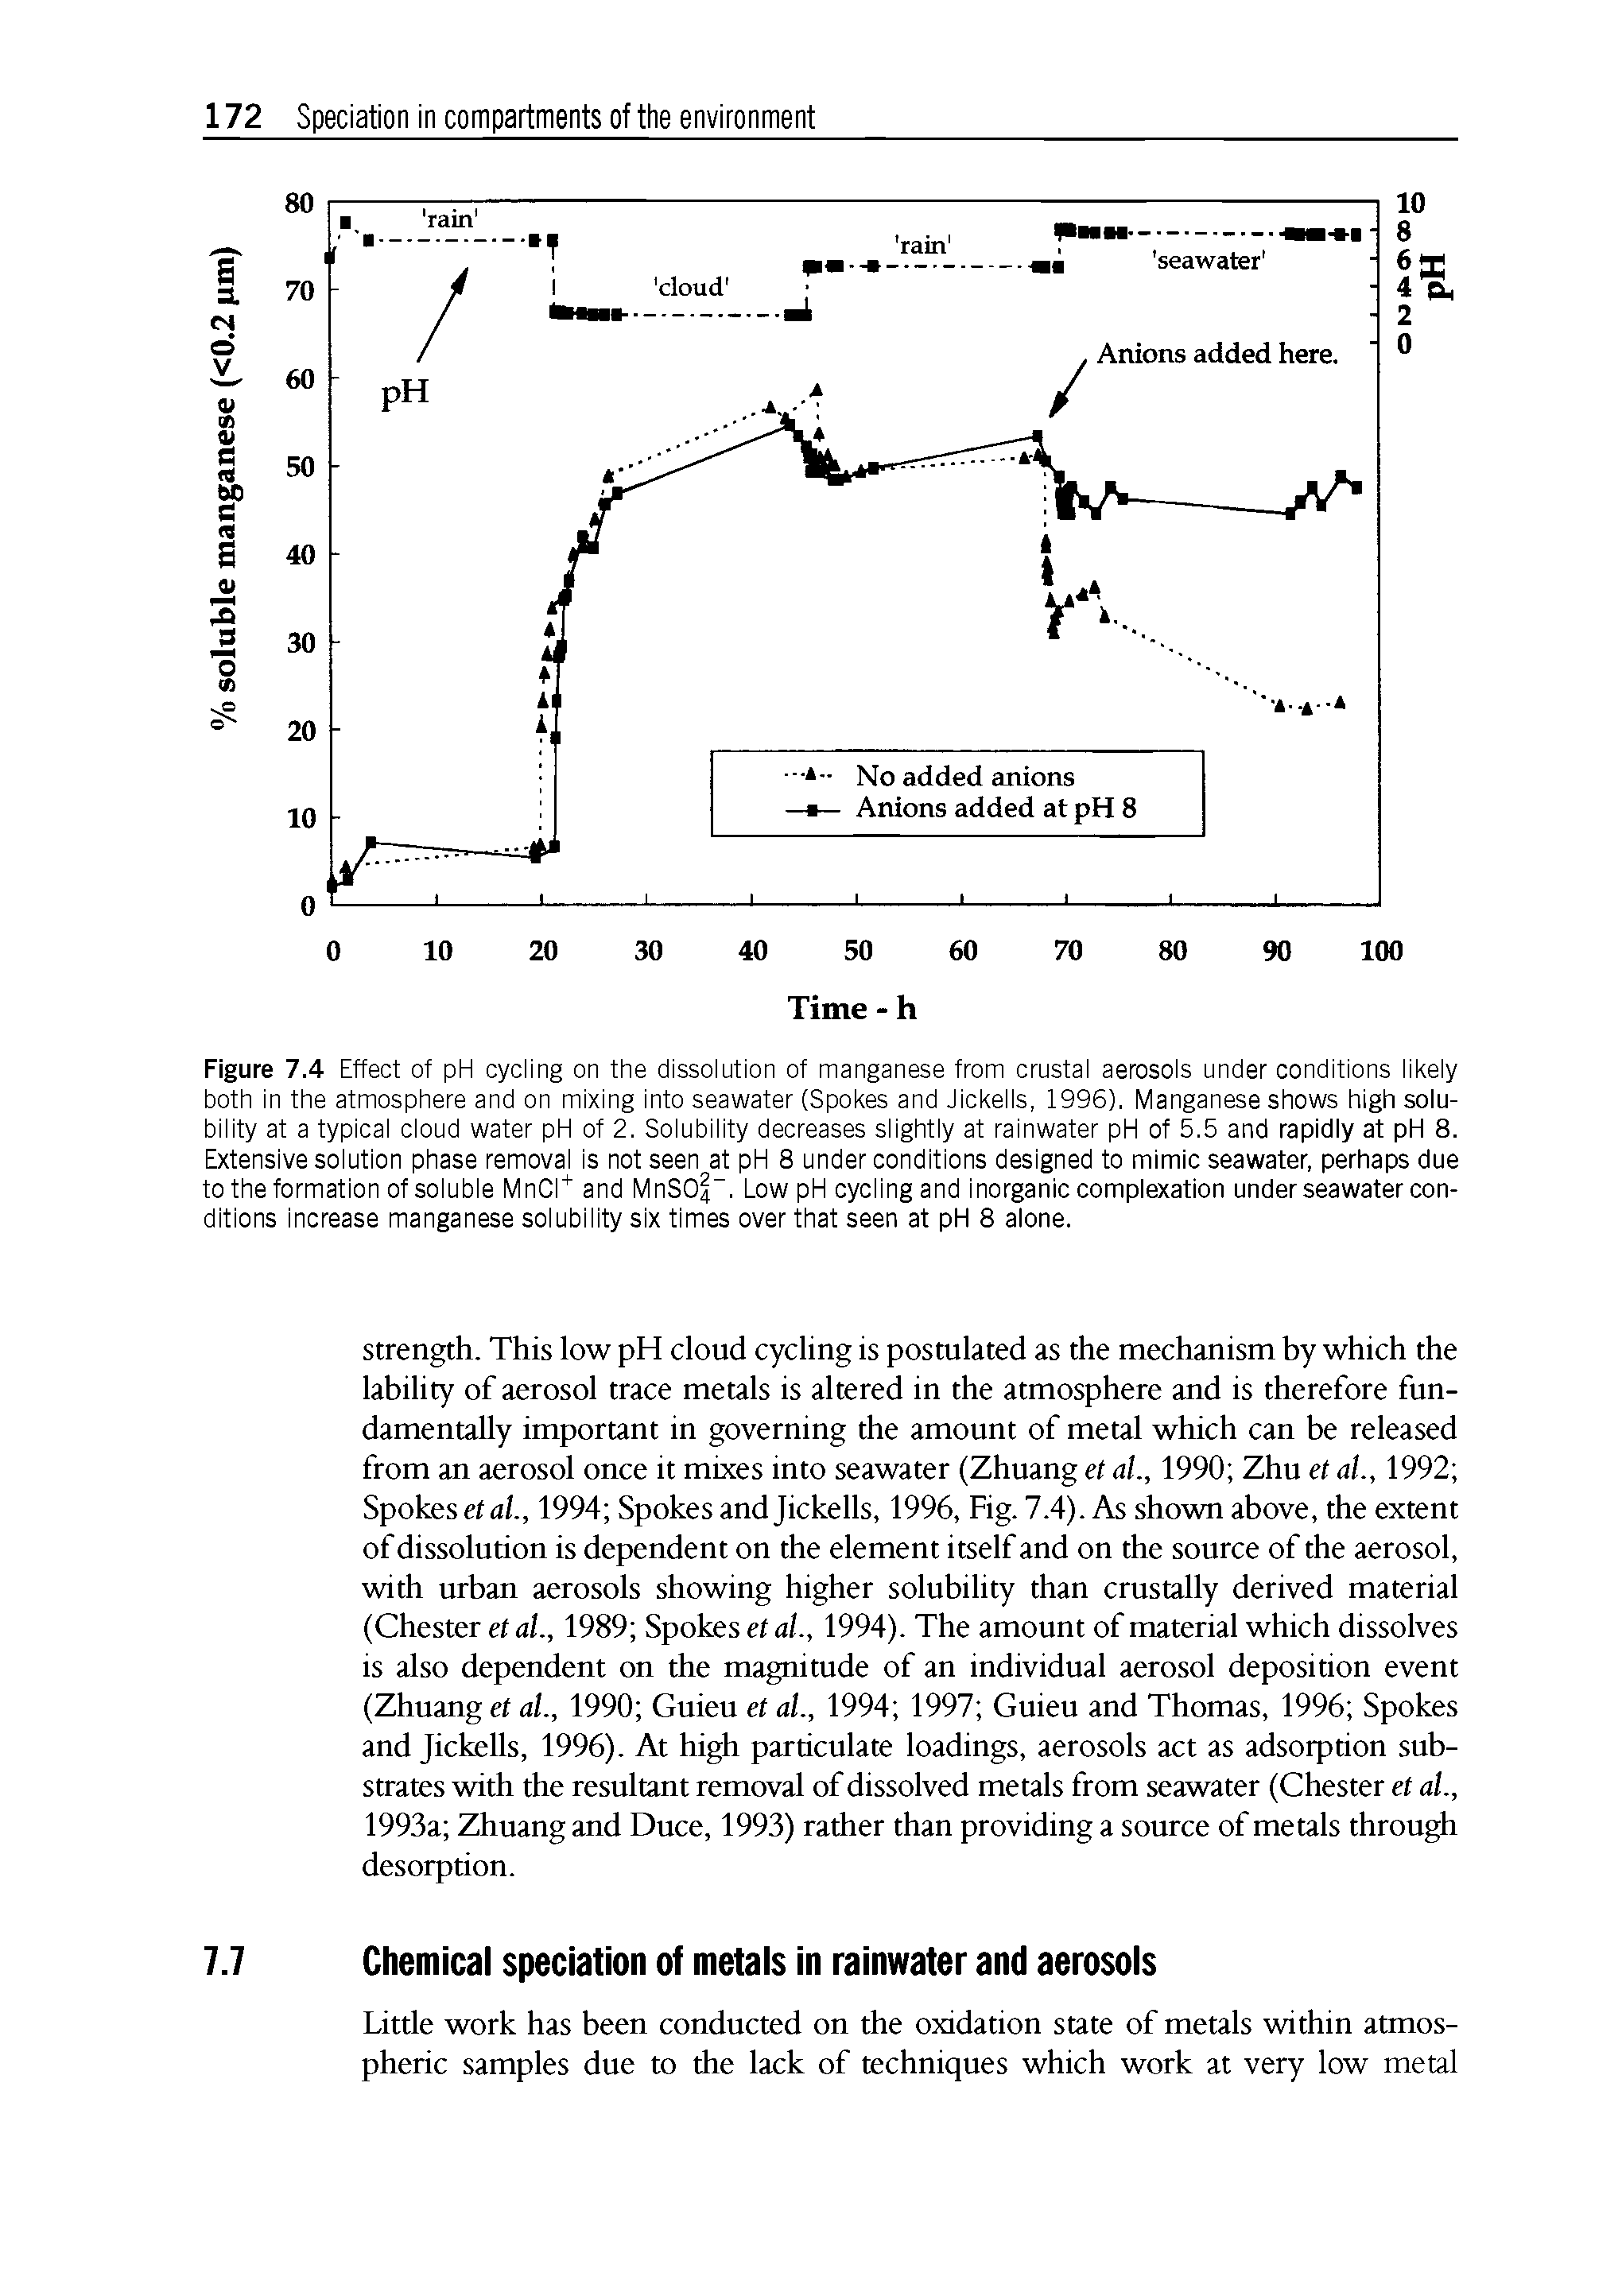 Figure 7.4 Effect of pH cycling on the dissolution of manganese from crustal aerosols under conditions likely both in the atmosphere and on mixing into seawater (Spokes and Jickells, 1996). Manganese shows high solubility at a typical cloud water pH of 2. Solubility decreases slightly at rainwater pH of 5.5 and rapidly at pH 8. Extensive solution phase removal is not seen at pH 8 under conditions designed to mimic seawater, perhaps due to the formation of soluble MnCI+ and MnSOl-. Low pH cycling and inorganic complexation under seawater conditions increase manganese solubility six times over that seen at pH 8 alone.